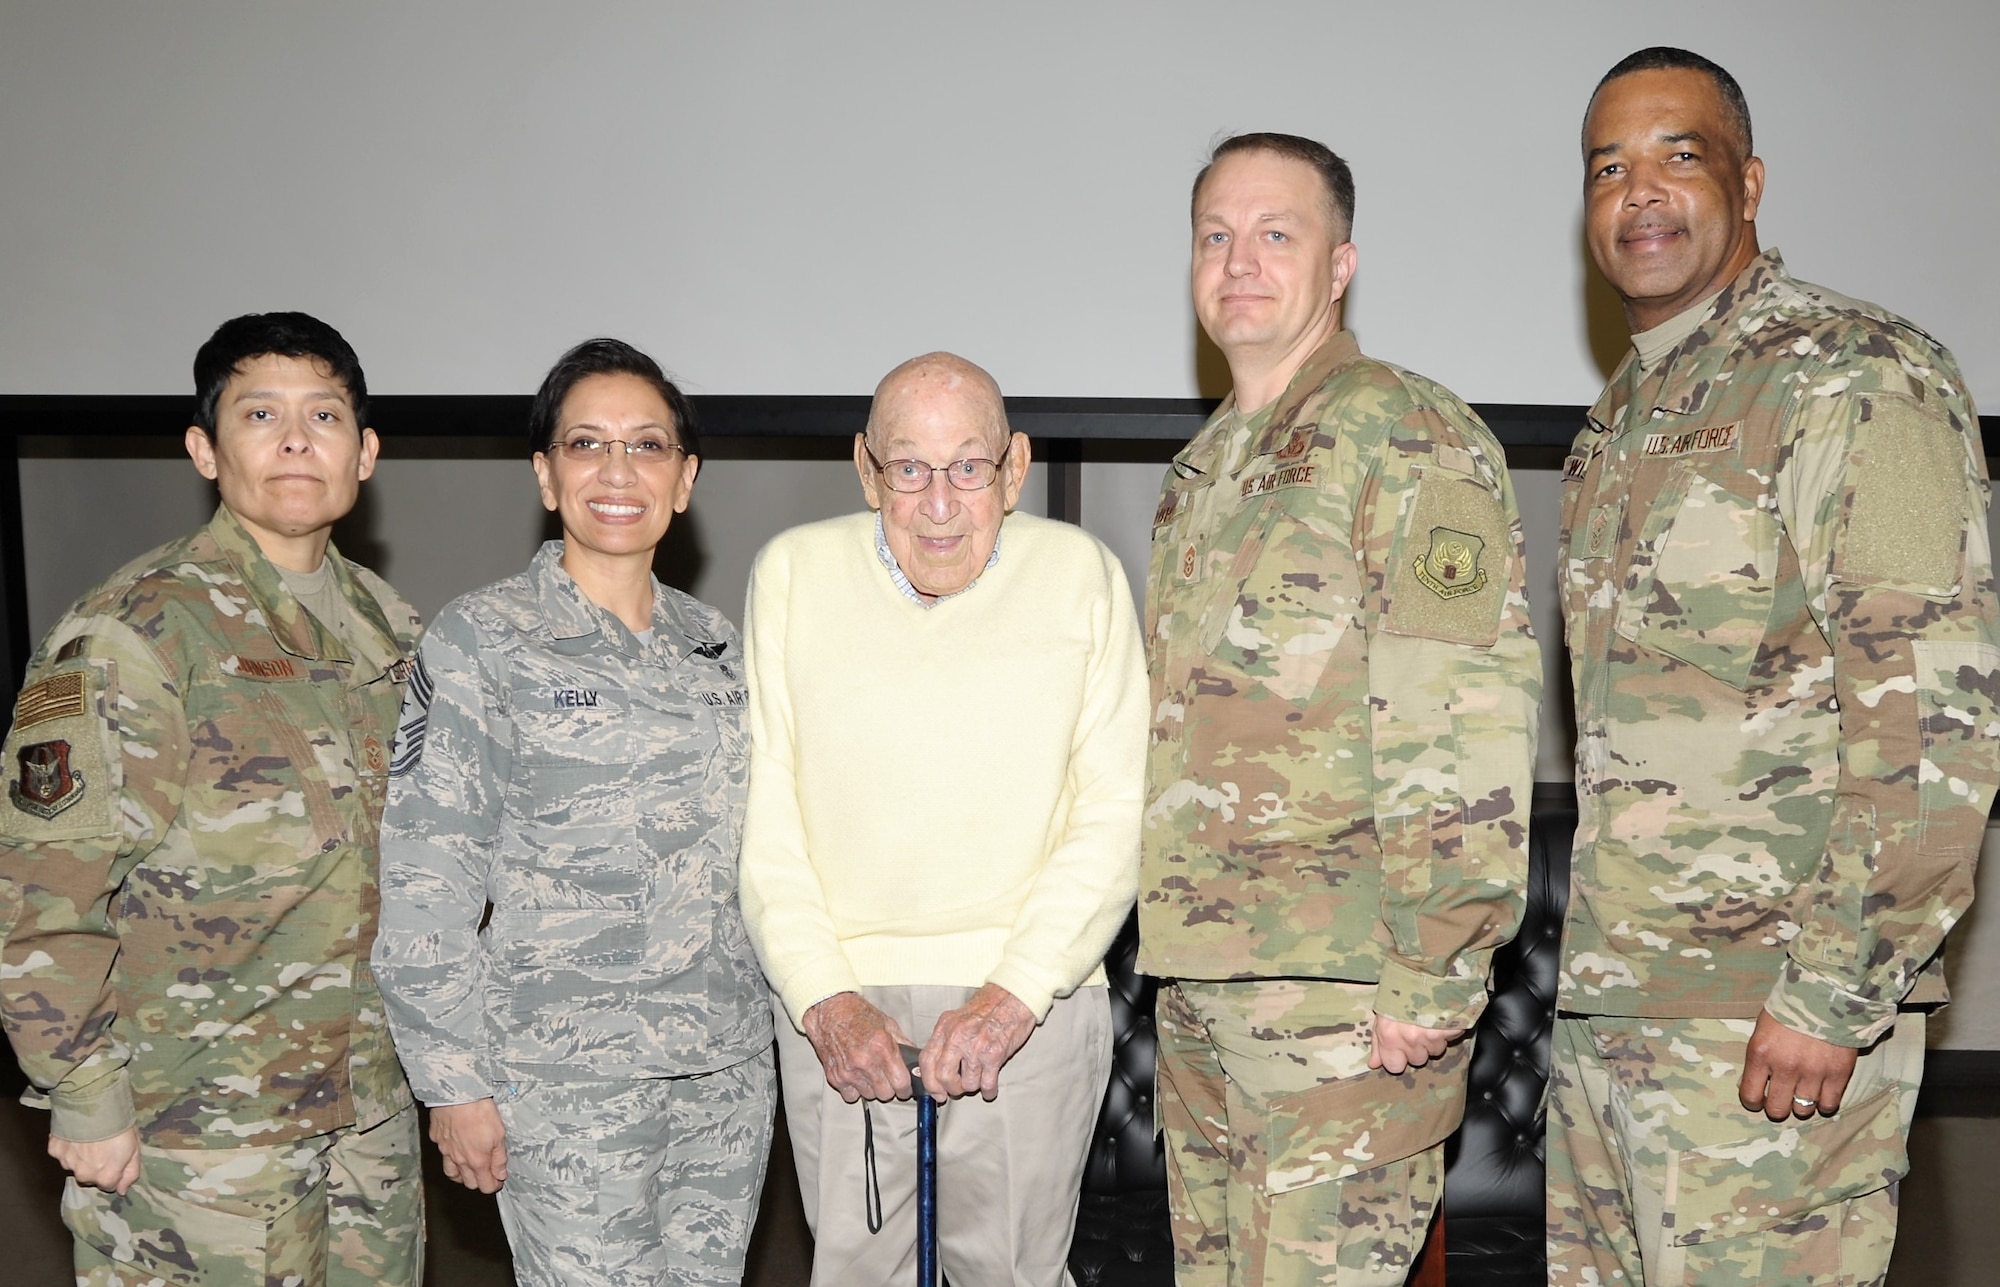 Retired Lt. Col. Dick Cole, the last living member of the World War II Doolittle Raiders, poses with Reserve Citizen Airmen command chief master sergeants following the pre-basic military training graduation Airman’s coin ceremony at Joint Base San Antonio-Lackland, Texas Dec. 13. Pictured with Colonel Cole are (left to right) Chief Master Sgt. Imelda Johnson, 22nd Air Force command chief; Chief Master Sgt. Ericka Kelly, Air Force Reserve Command command chief; Chief Master Sgt. James Loper, 10th Air Force command chief; and Chief Master Sgt. Timothy White, 4th Air Force command chief. (U.S. Air Force photo by Debbie Gildea)